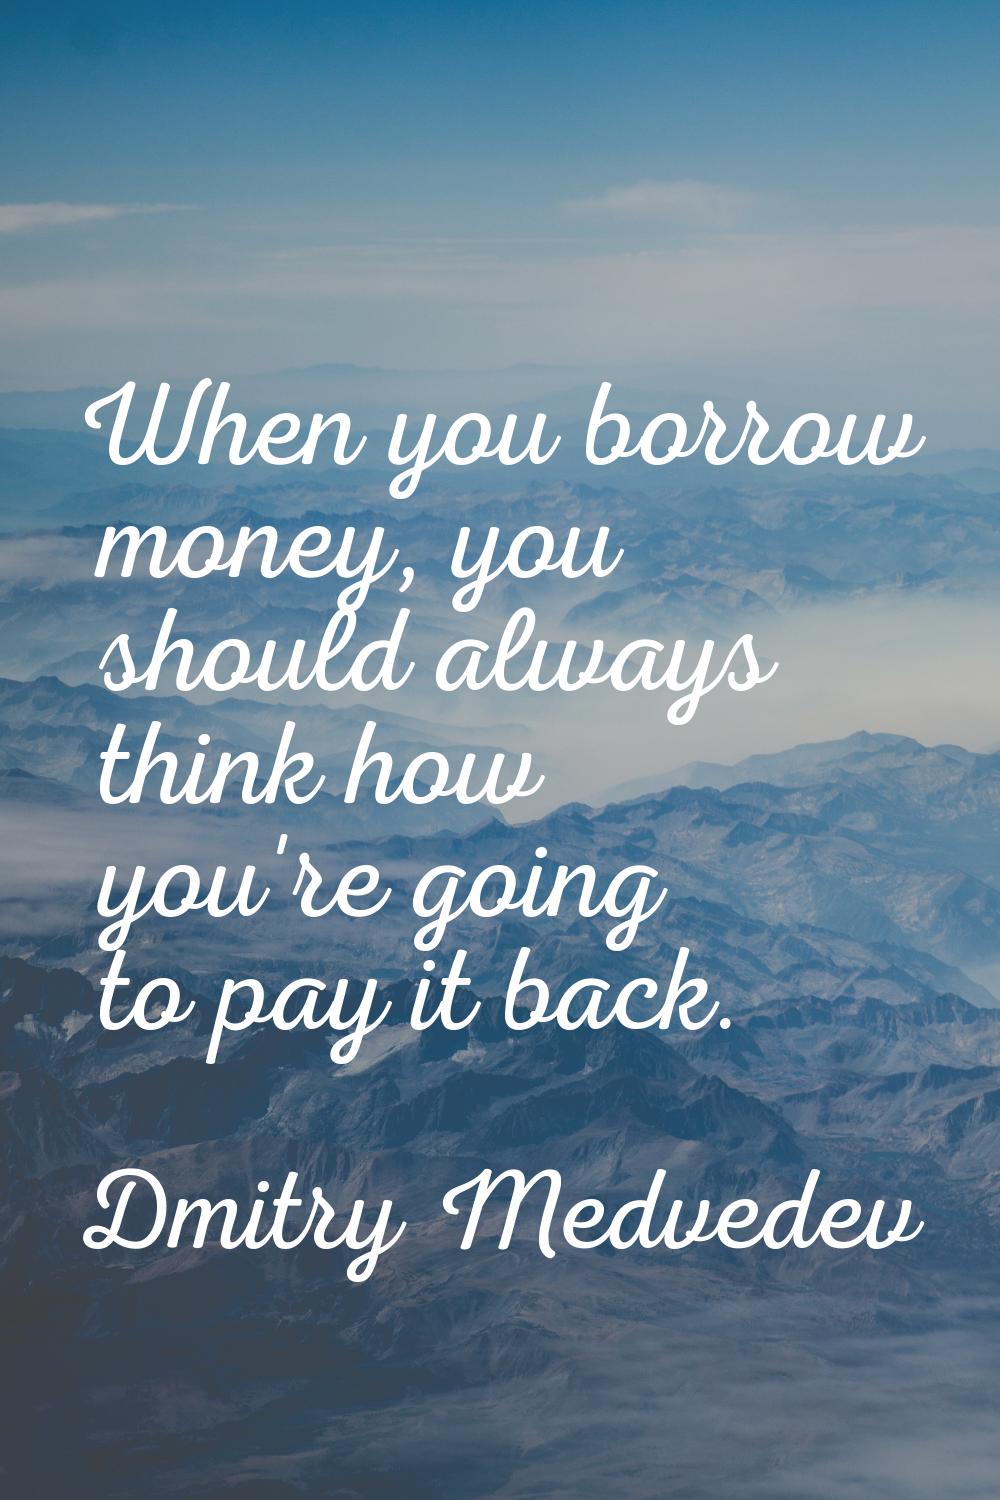 When you borrow money, you should always think how you're going to pay it back.